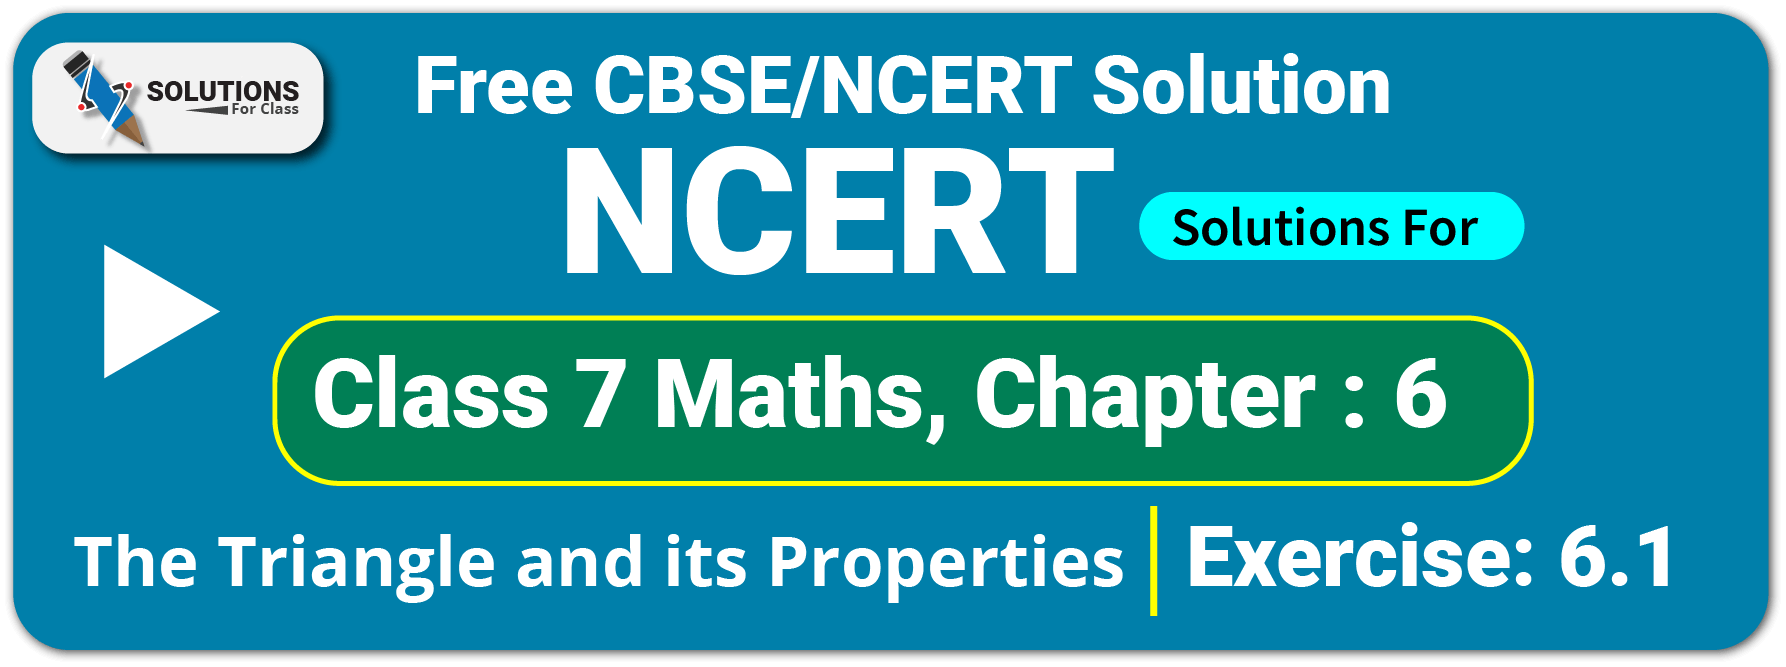 NCERT Solutions Class 7 Maths Chapter 6 The Triangle and its Properties Exe.6.1